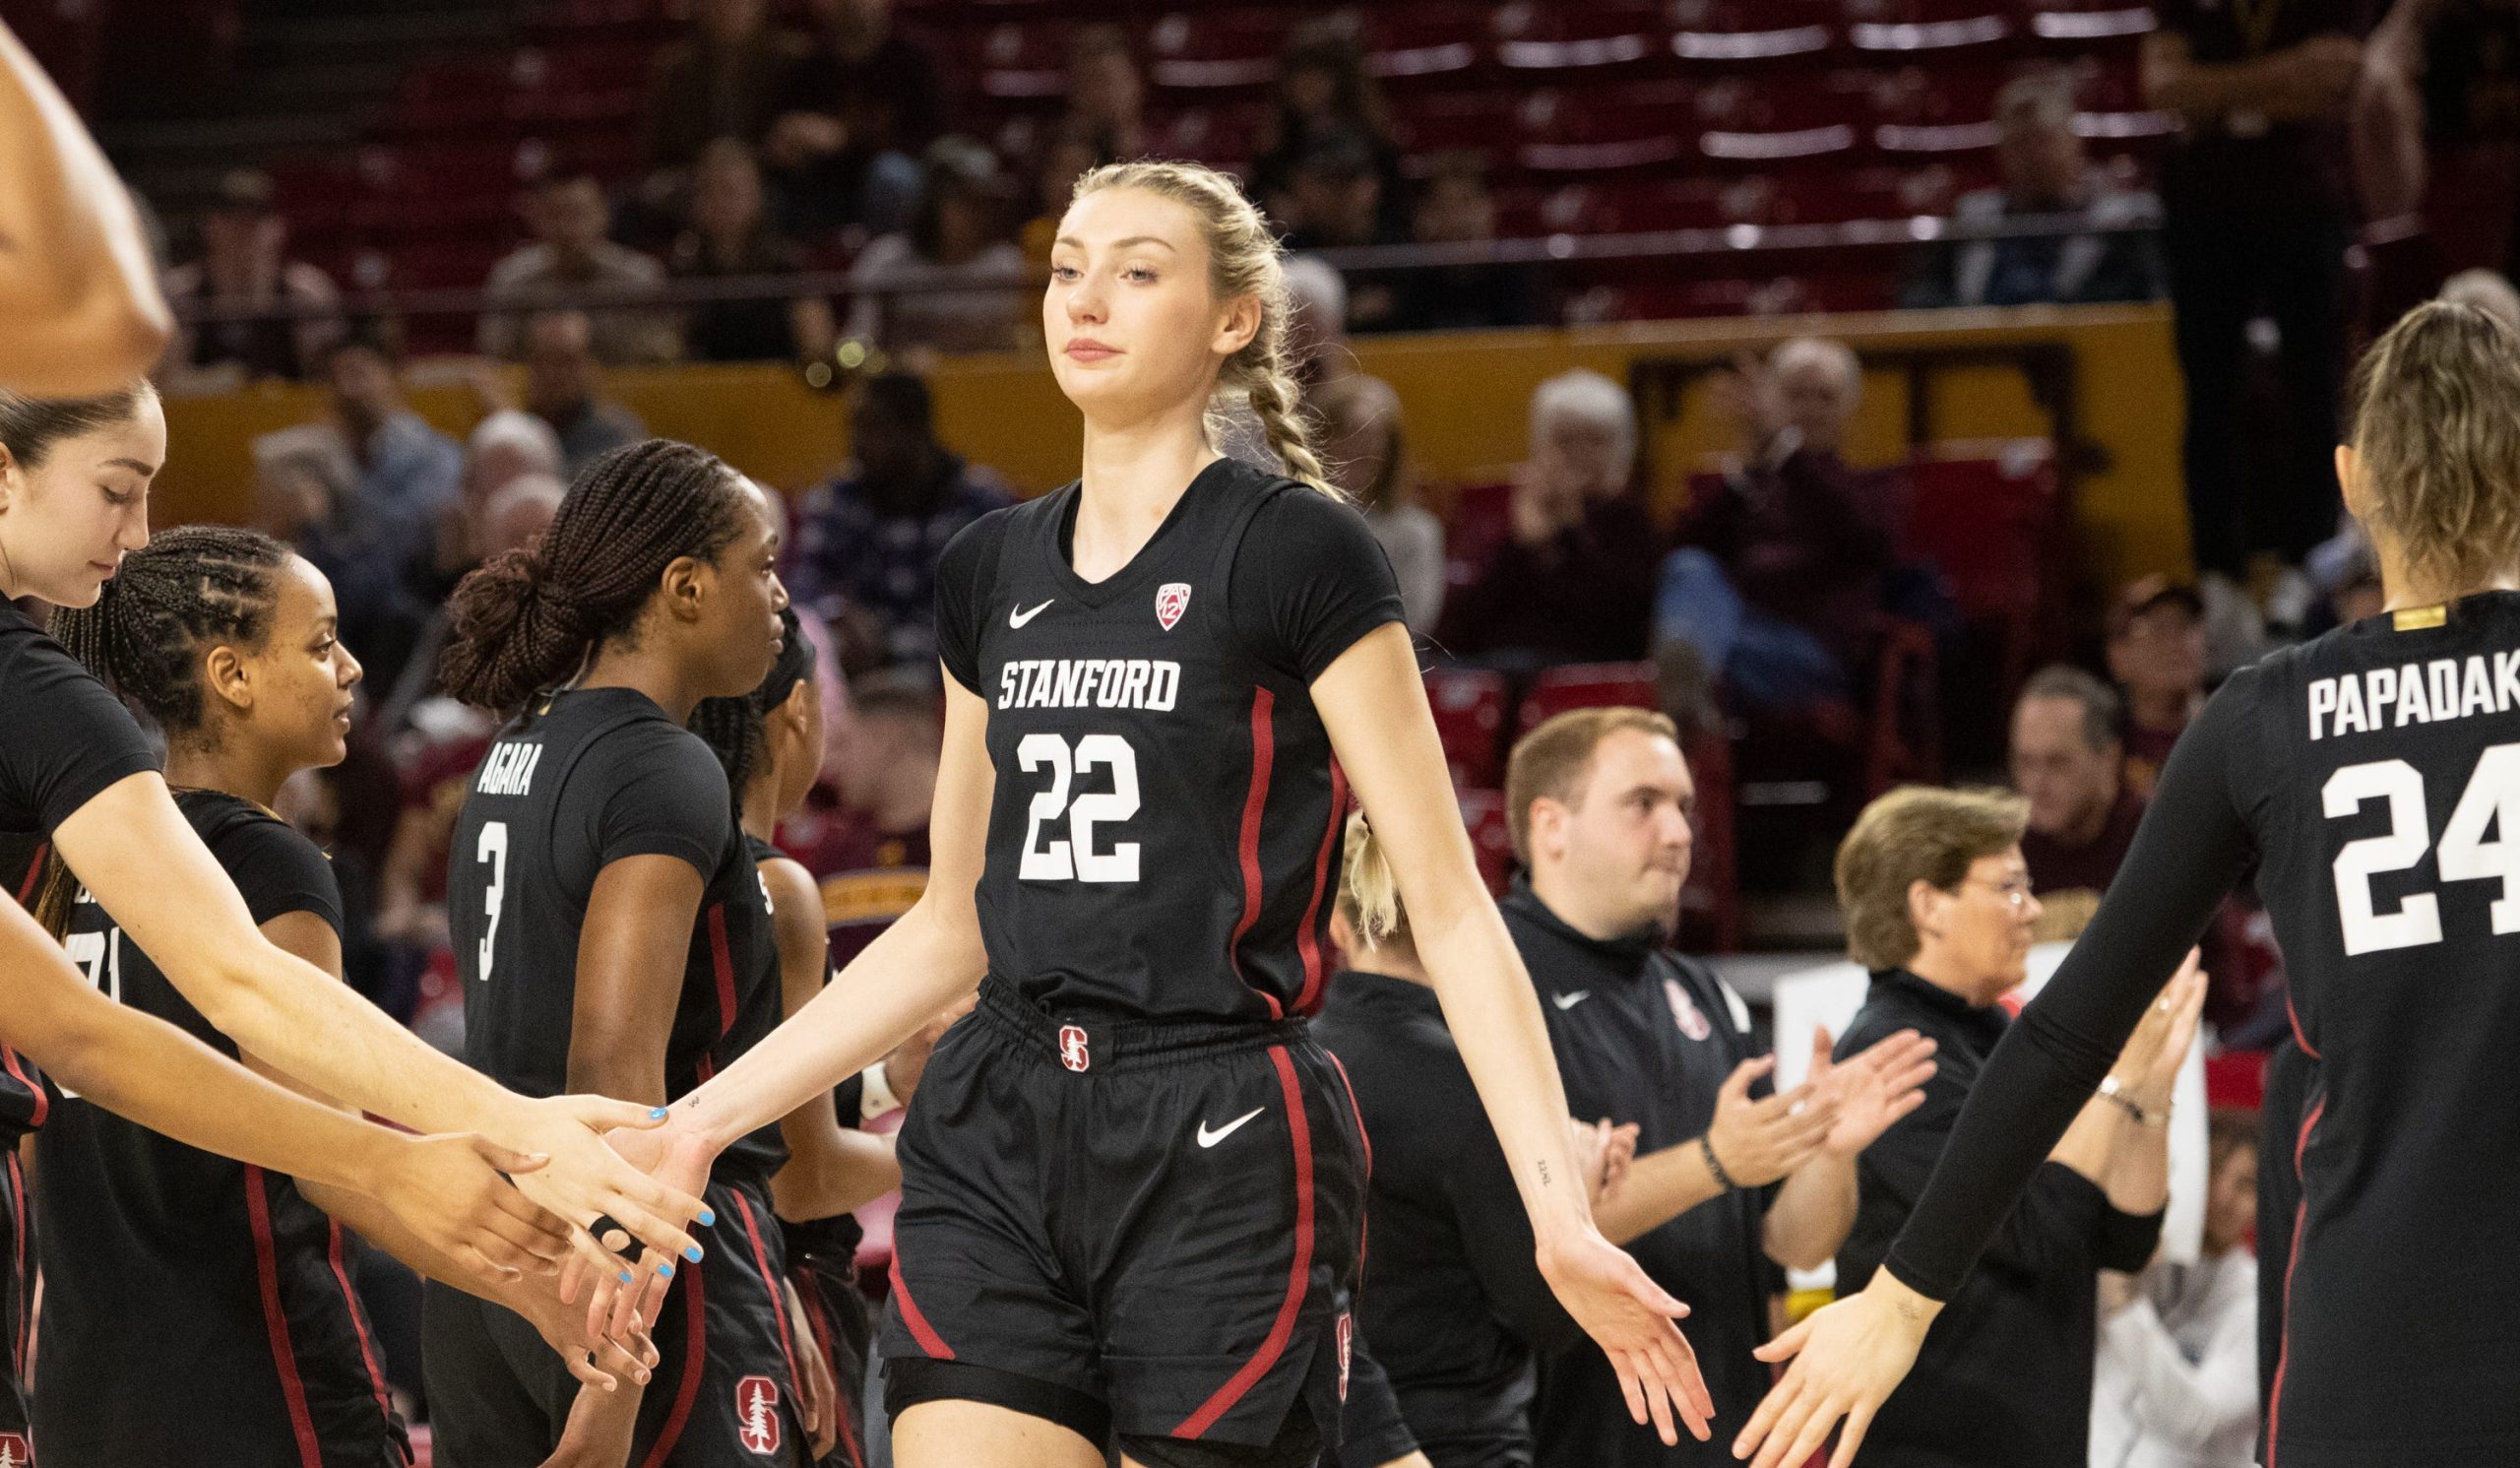 Stanford star Cameron Brink shared that the added travel with moving to the ACC contributed to her entering the WNBA Draft. Photo Credit: Nicole Mullen/The Republic/USA TODAY NETWORK